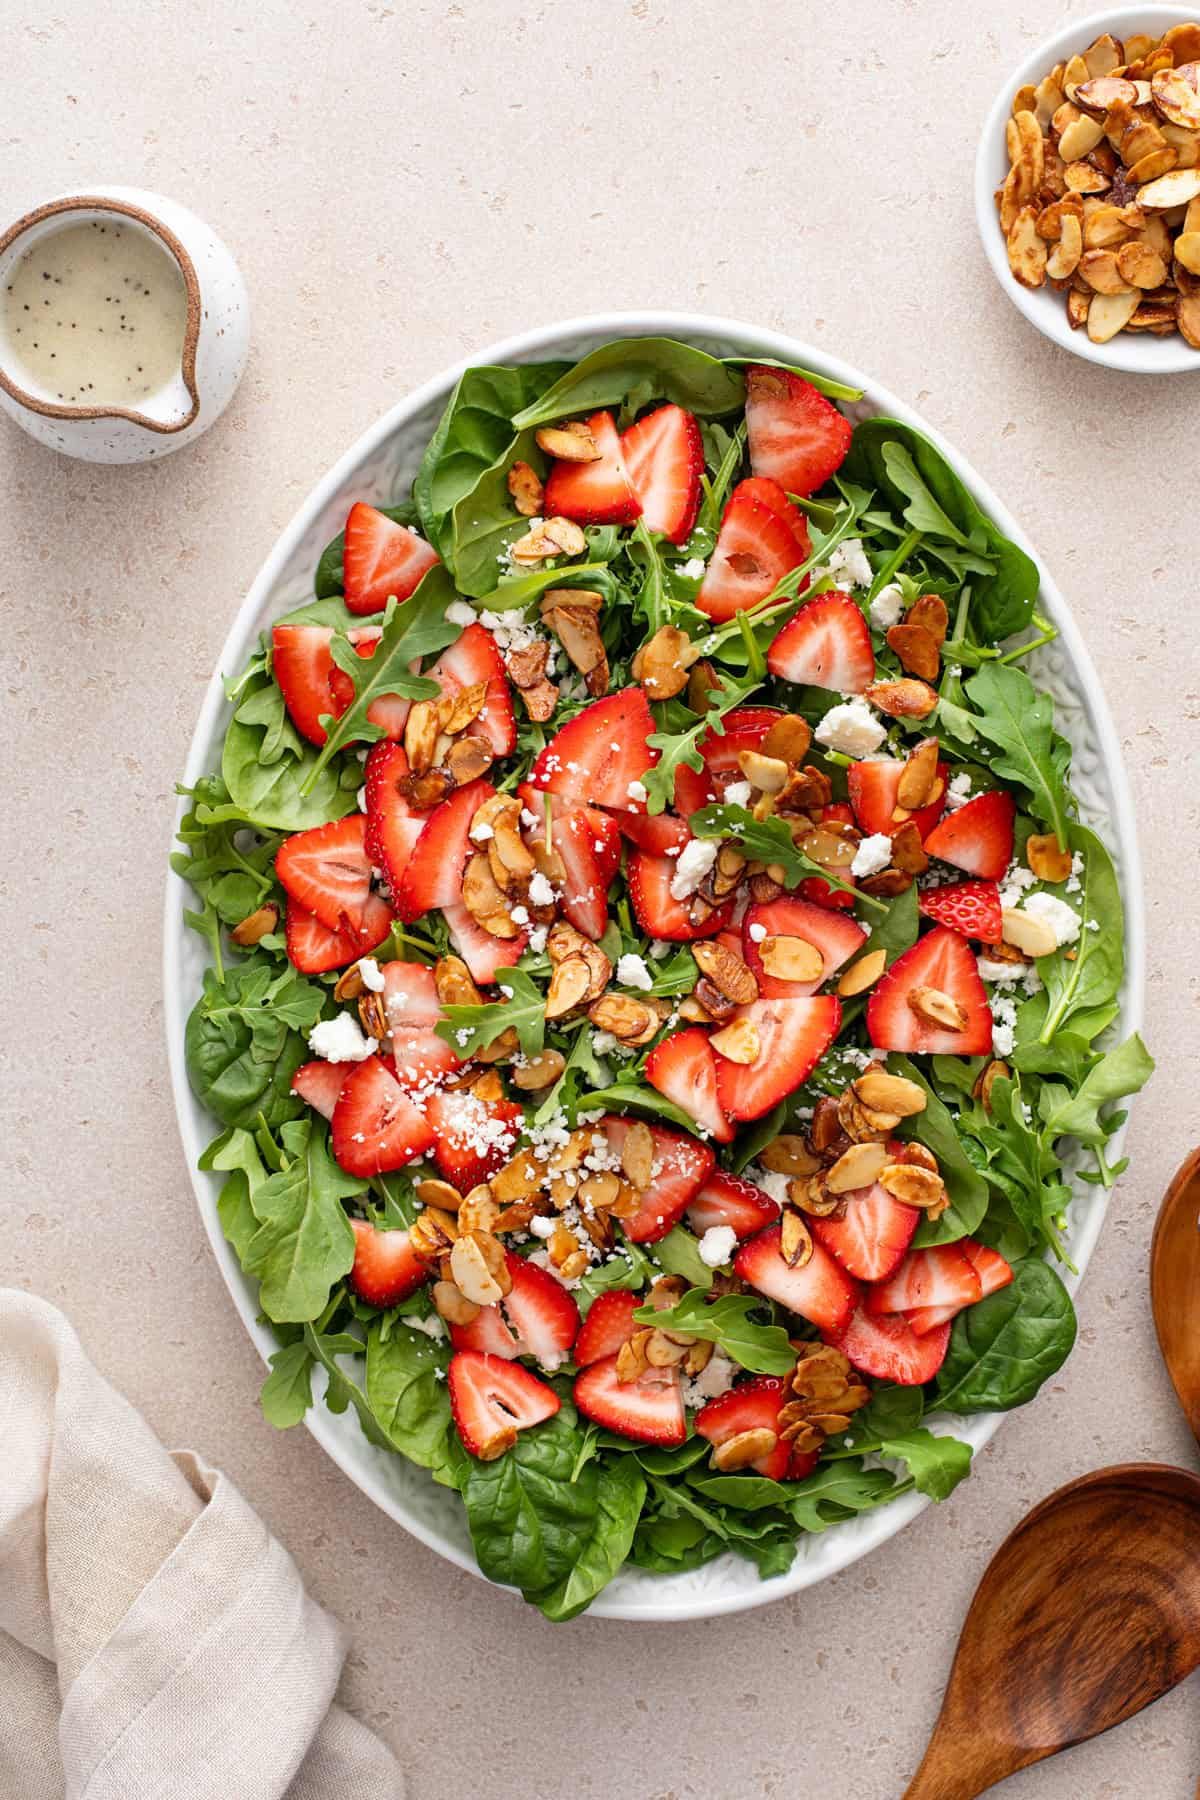 Overhead view of a serving platter filled with strawberry salad.